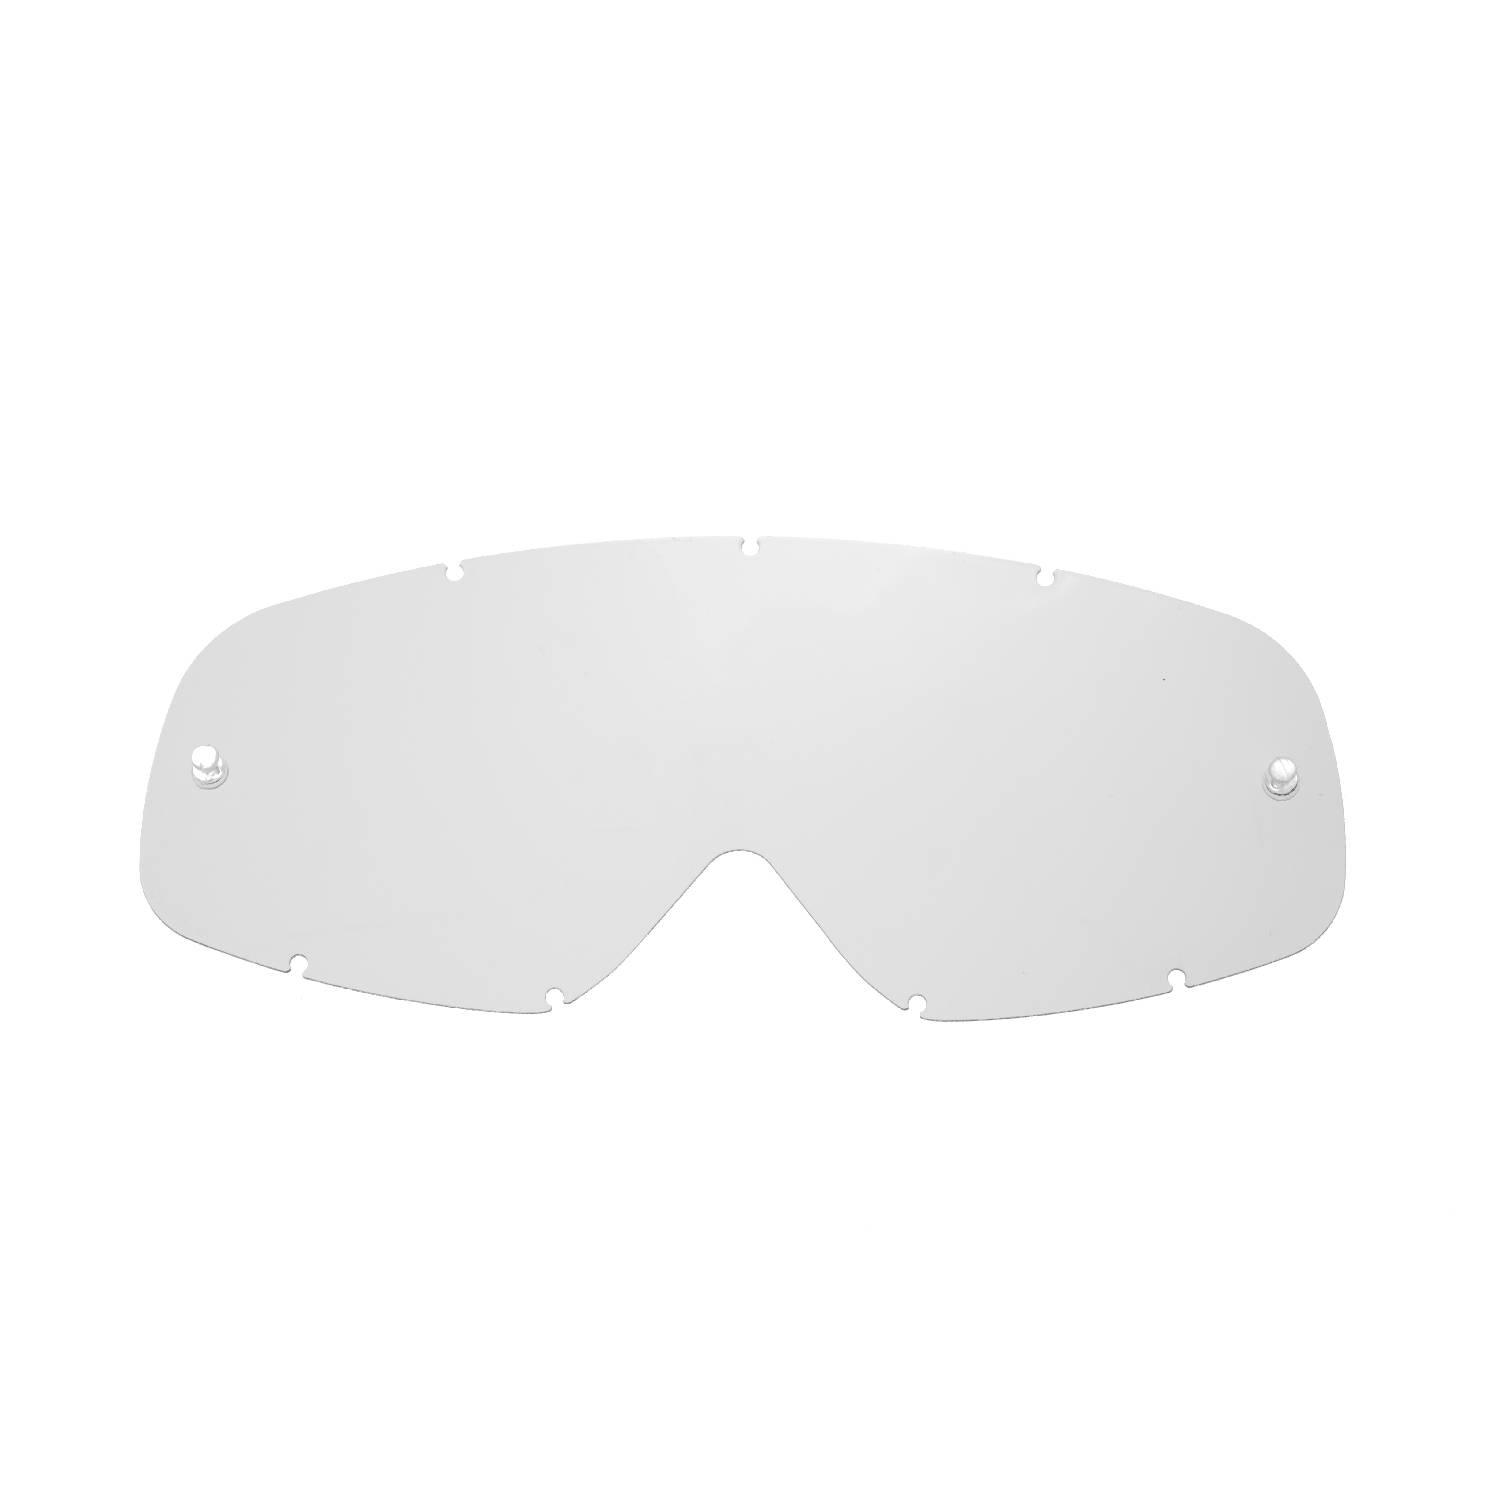 clear replacement lenses for goggles compatible for Oakley O-frame goggle